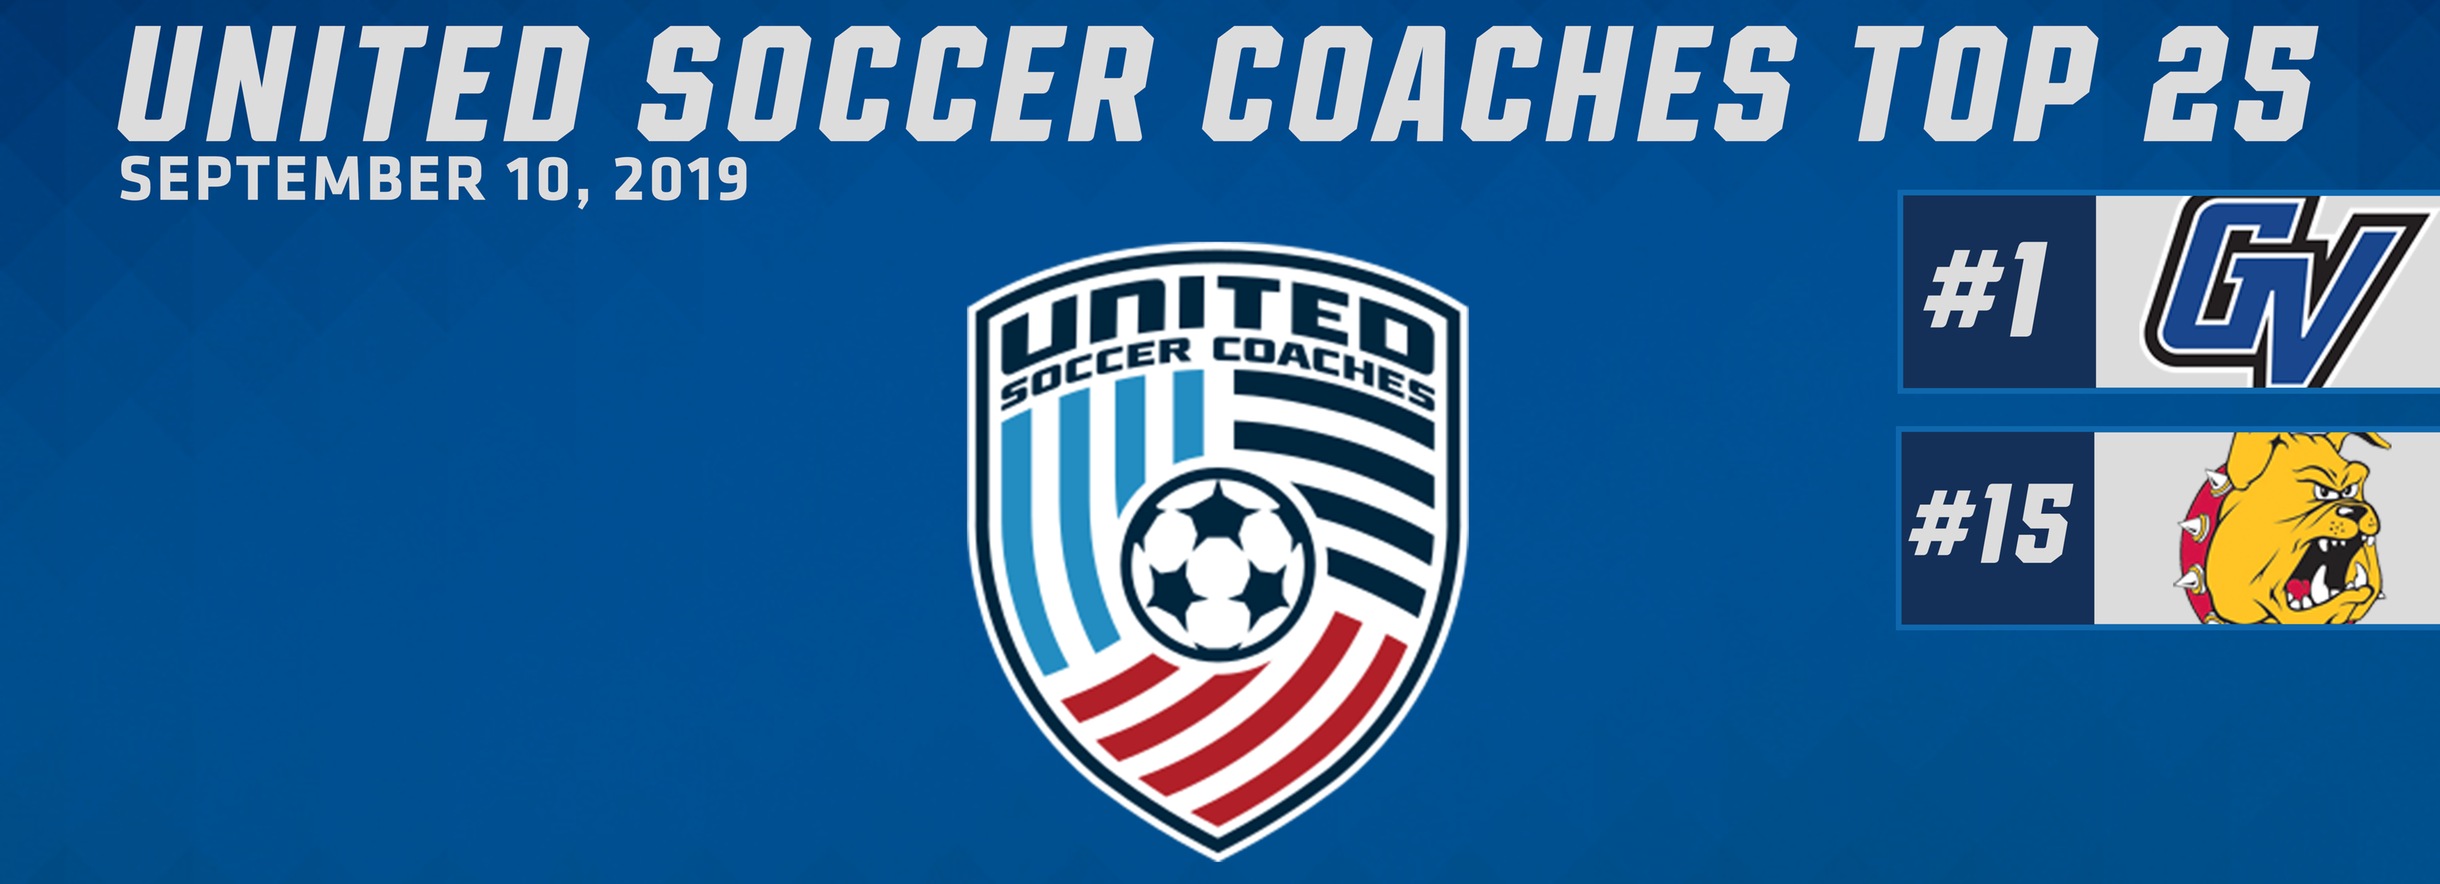 Grand Valley State Remains No. 1, FSU 15 in United Soccer Coaches Poll